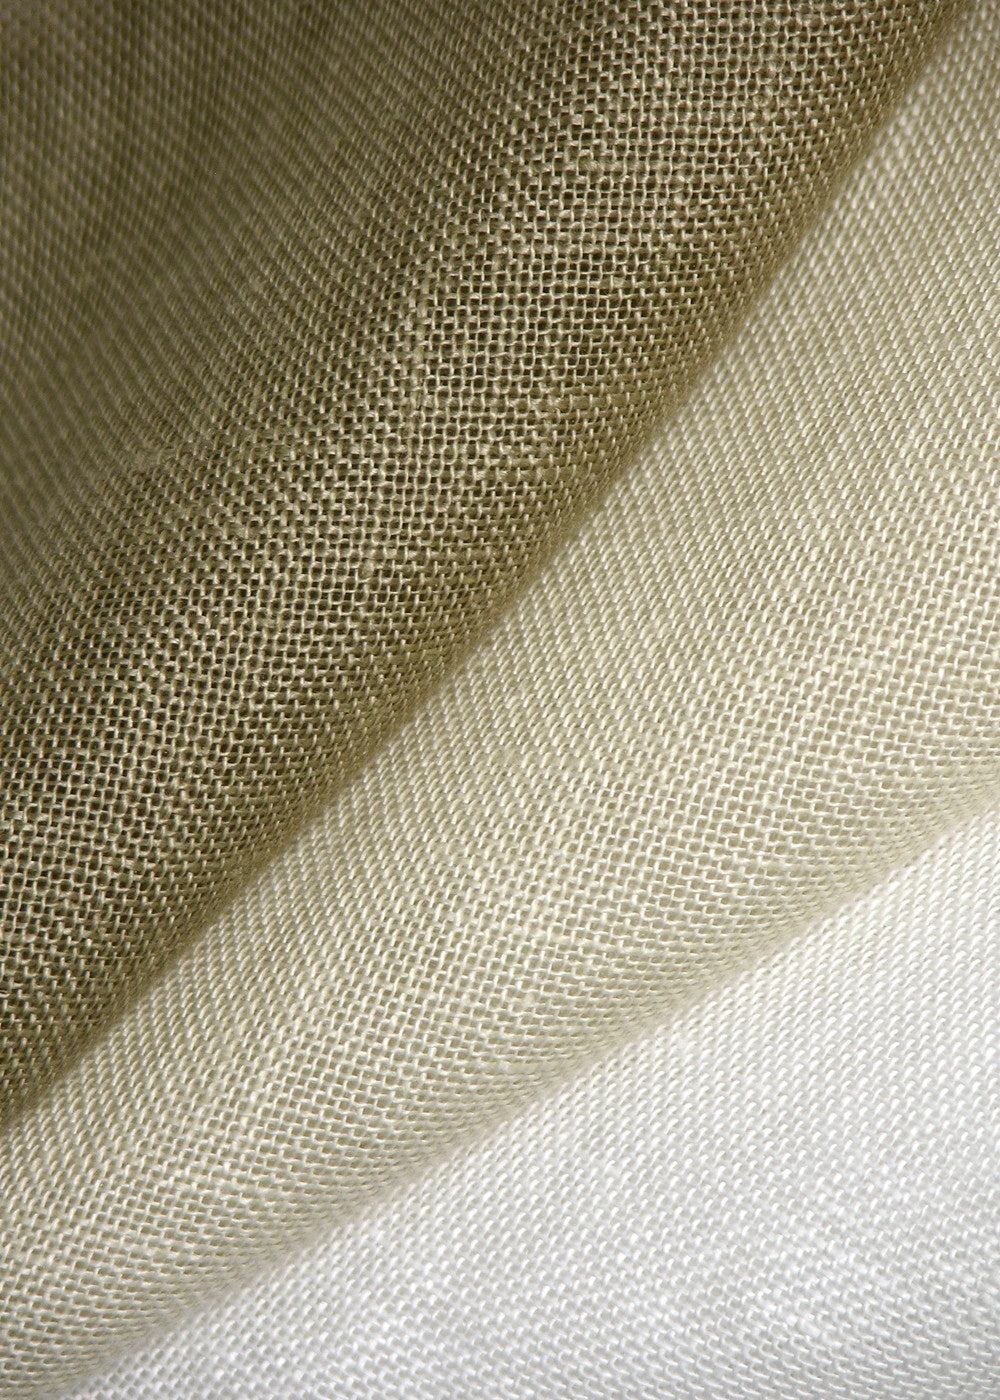 close up of woven linen fabric in several colors